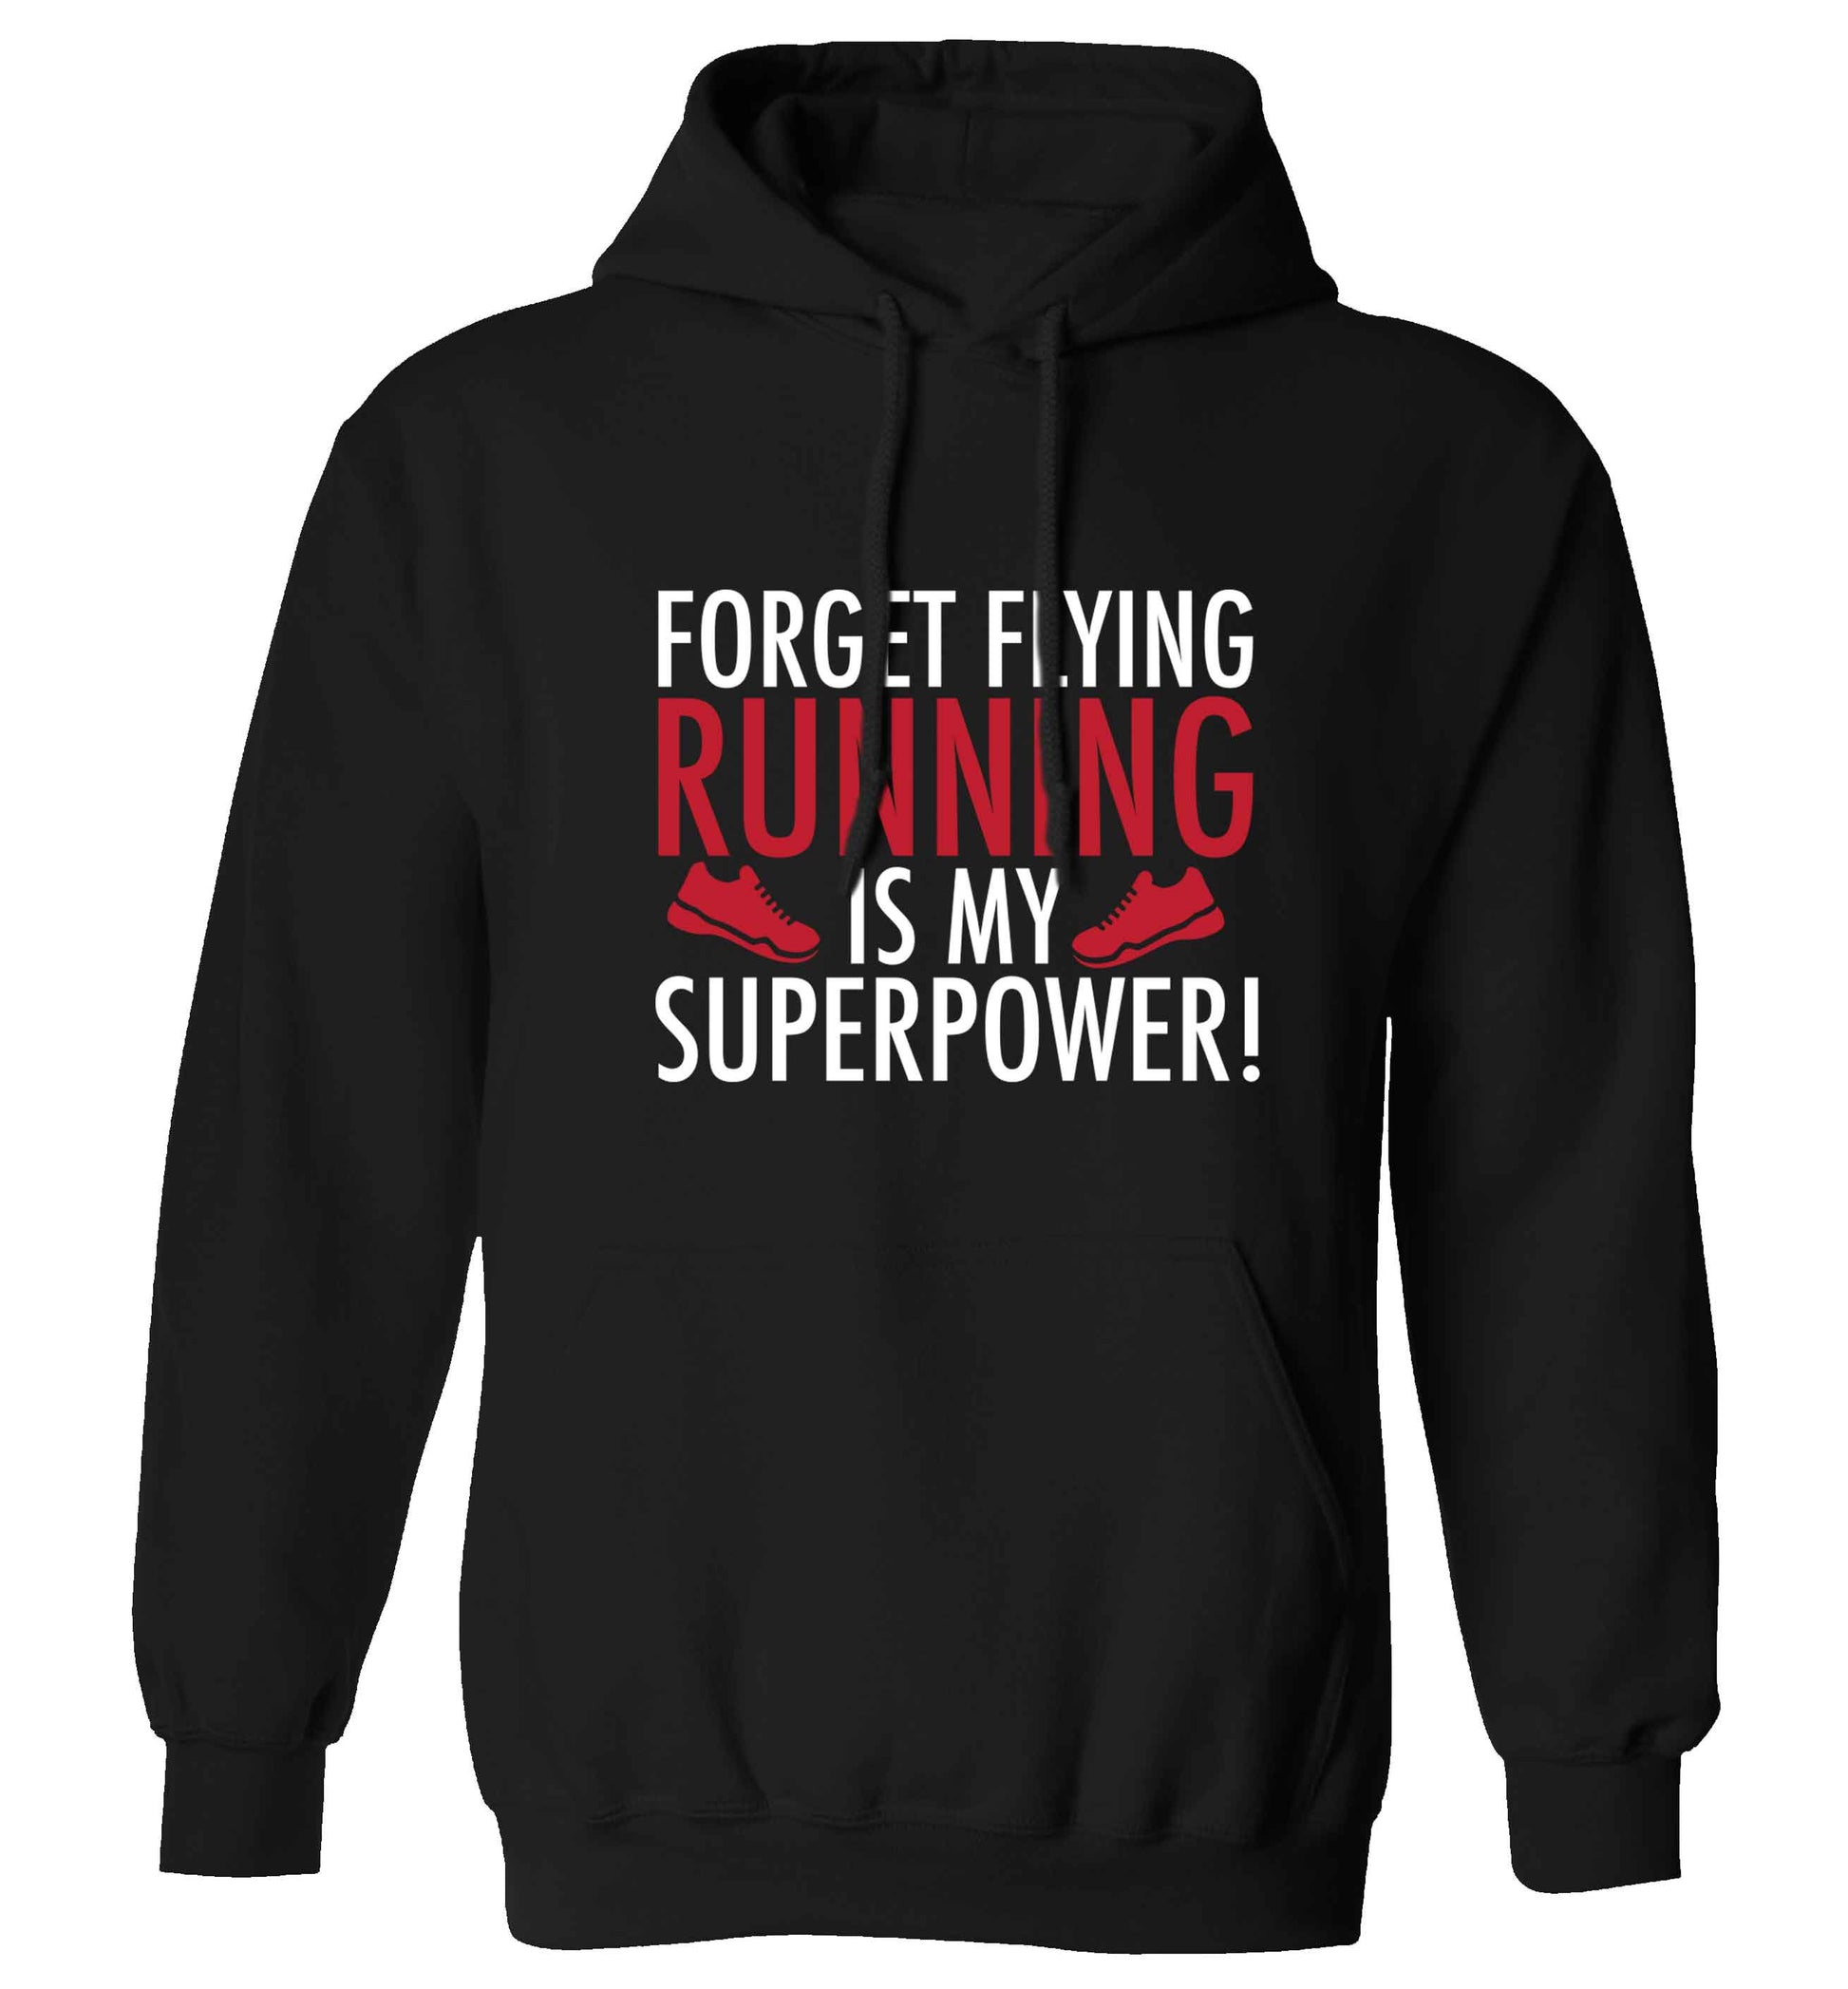 Forget flying running is my superpower adults unisex black hoodie 2XL